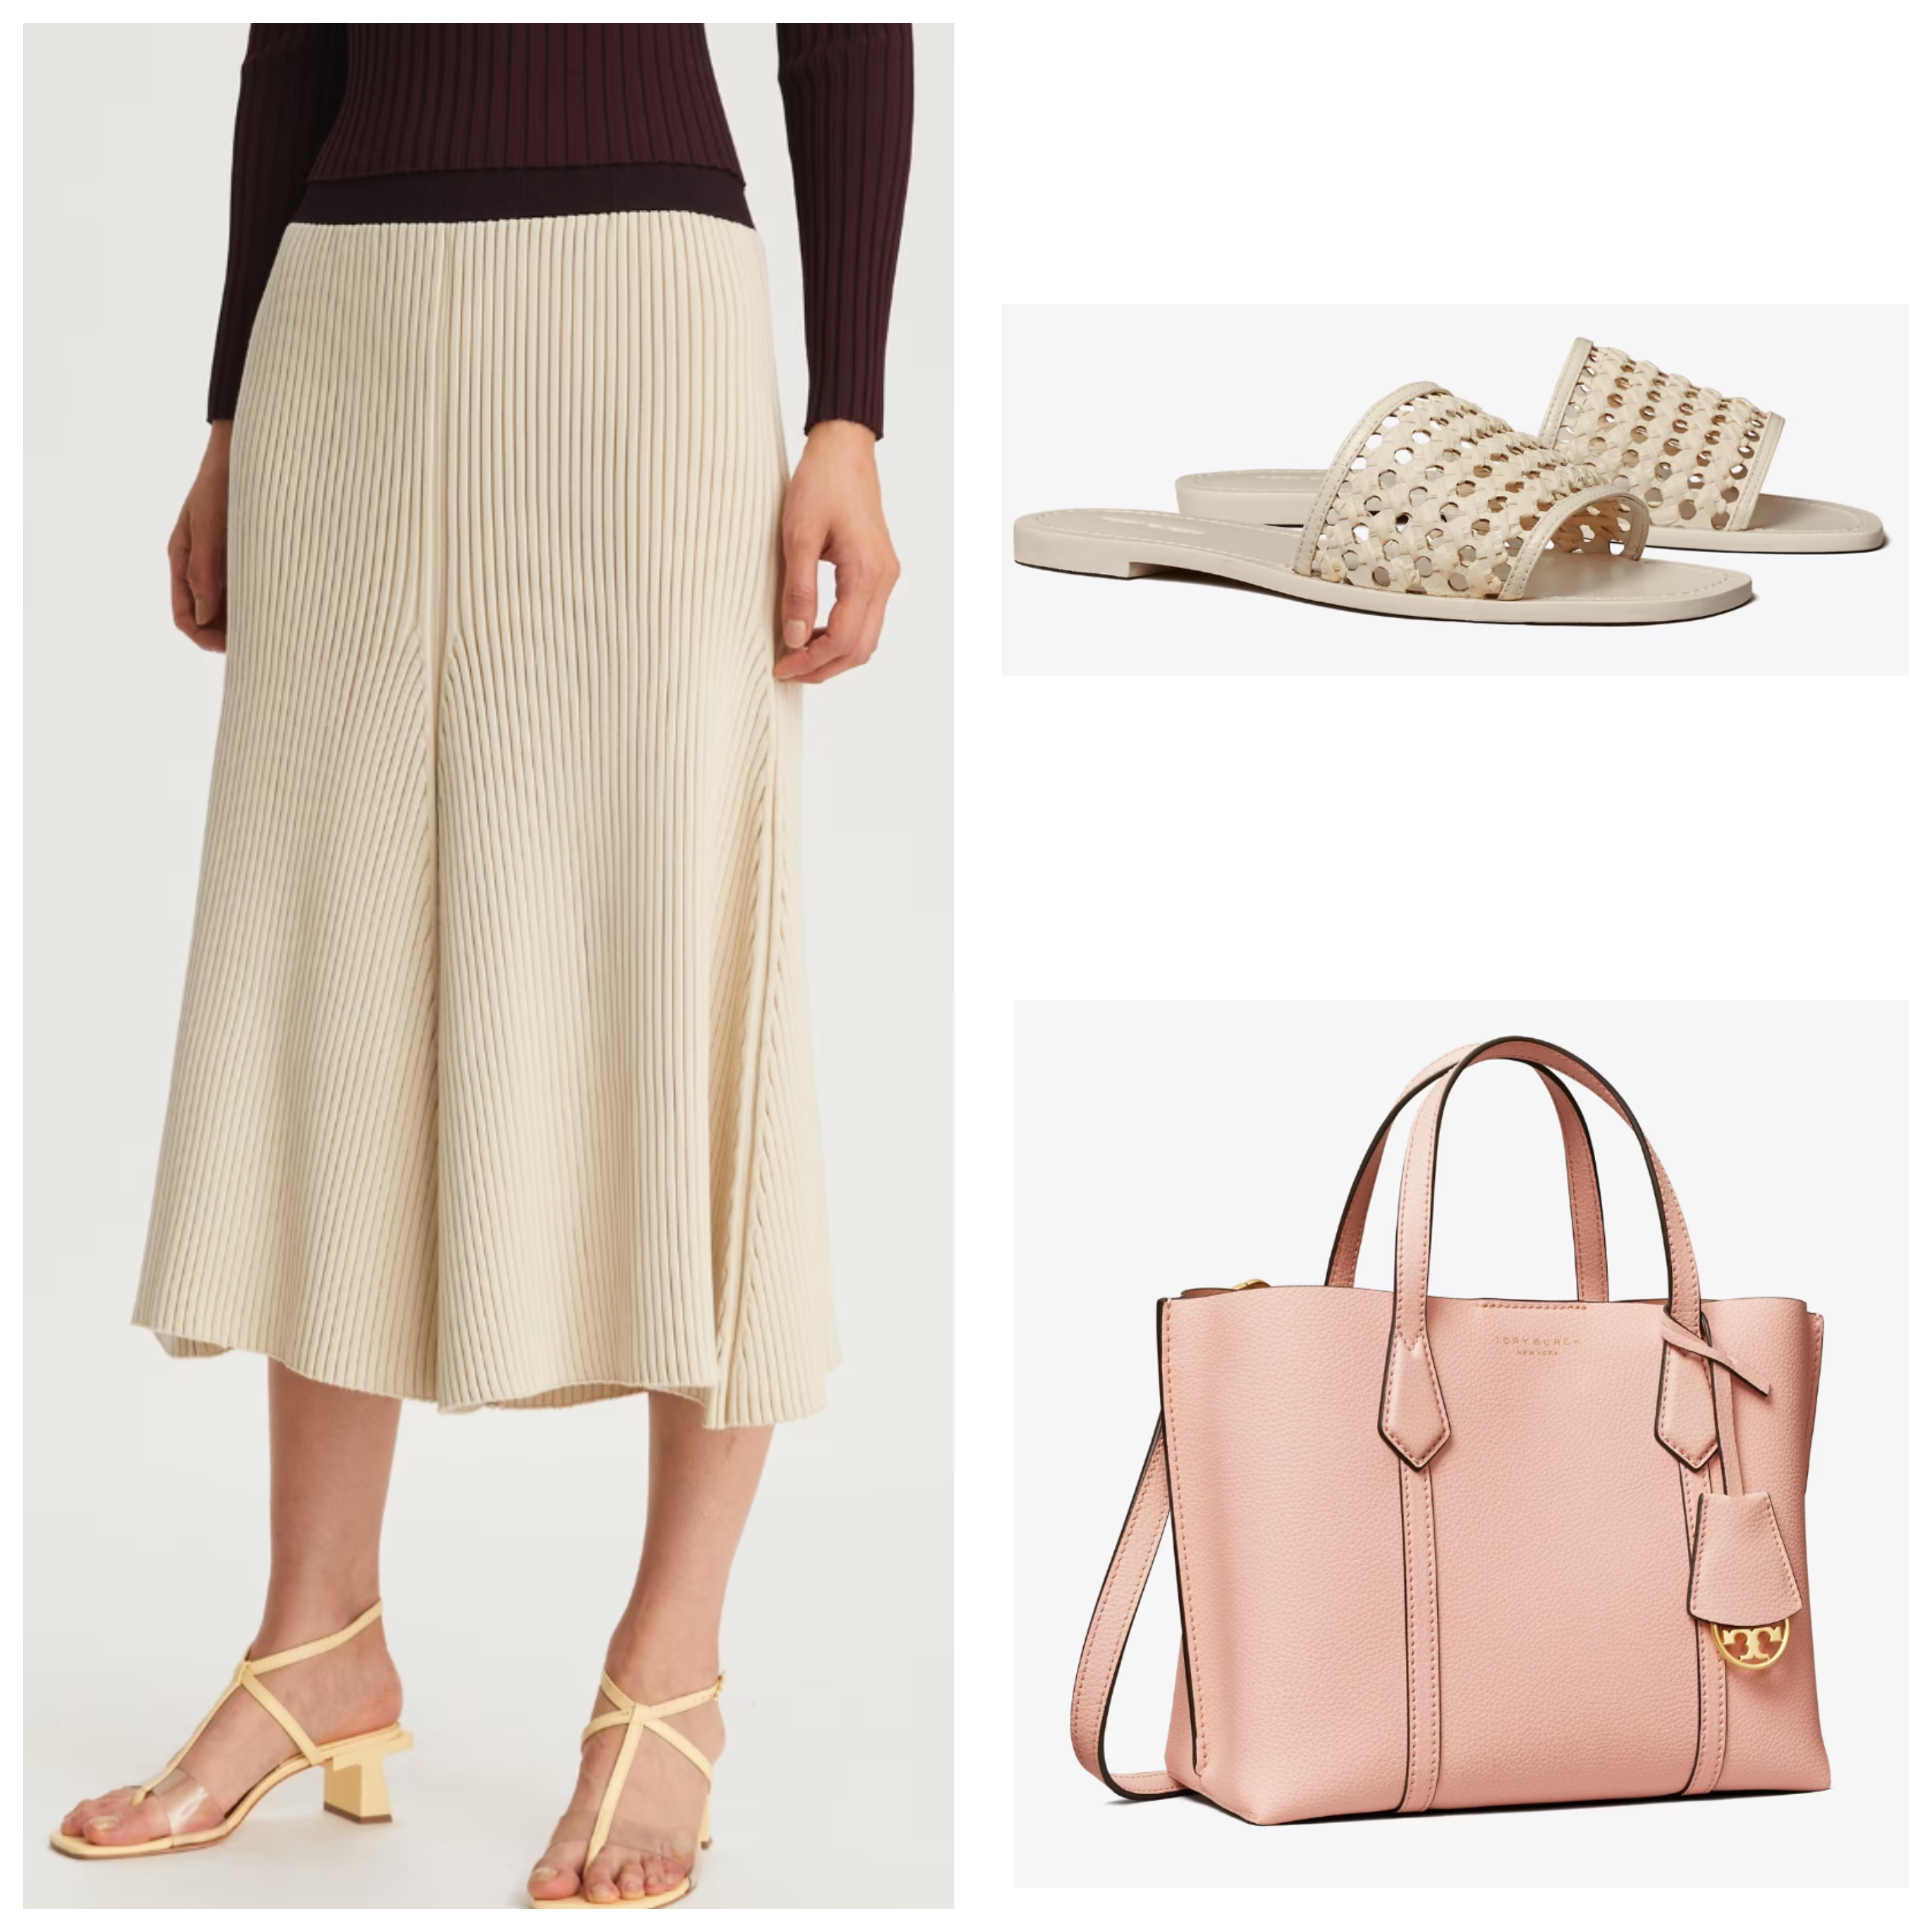 Tory Burch spring sale: Save on clothing, shoes, bags & accessories -  